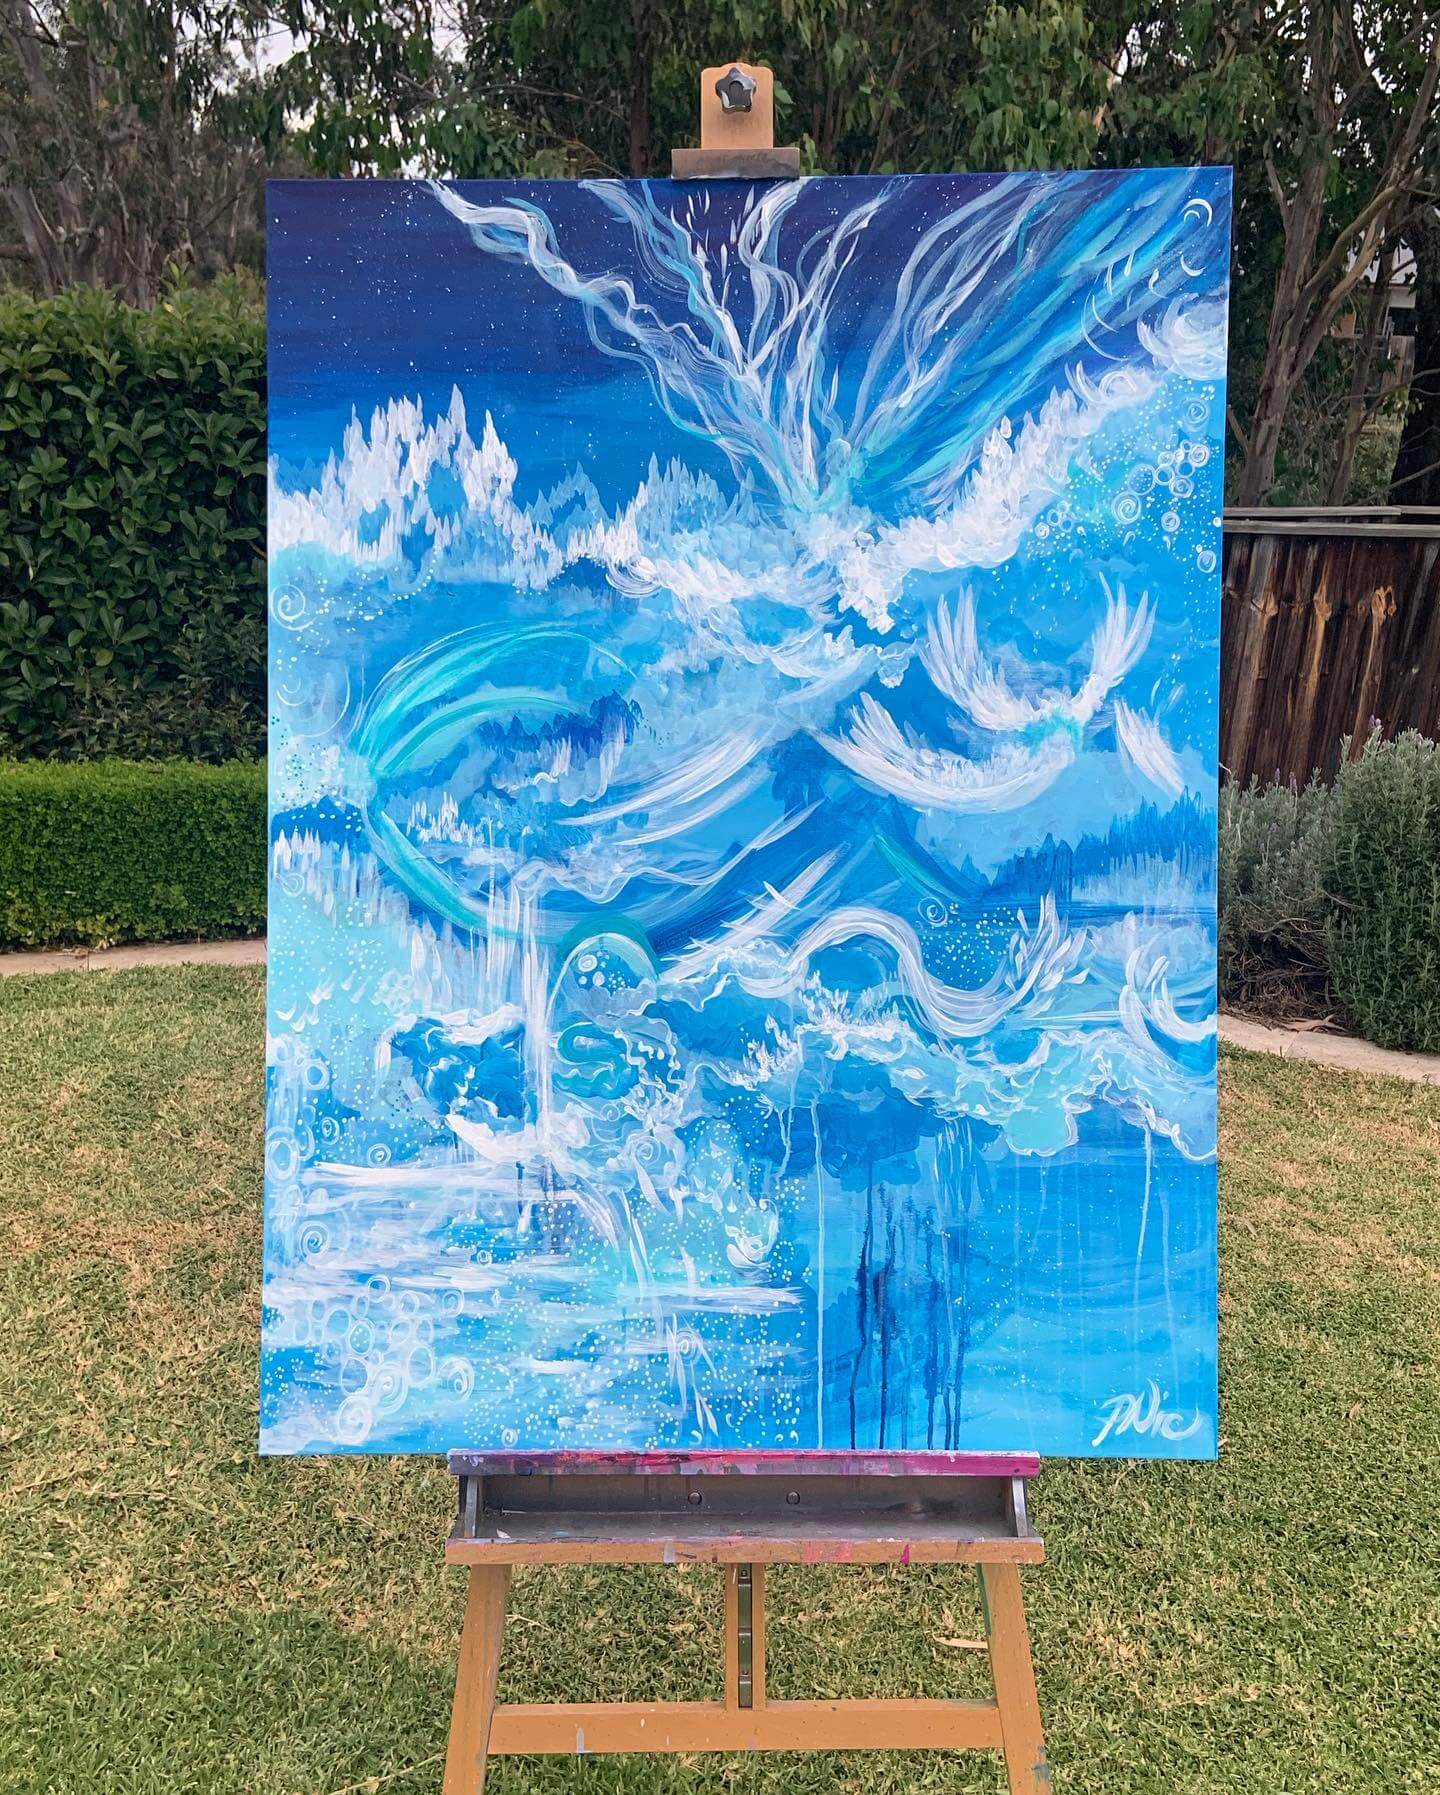 An easel with a canvas painting outside in a green backyard of Sydney. The canvas has blue paint painted in an abstract way with white waves.